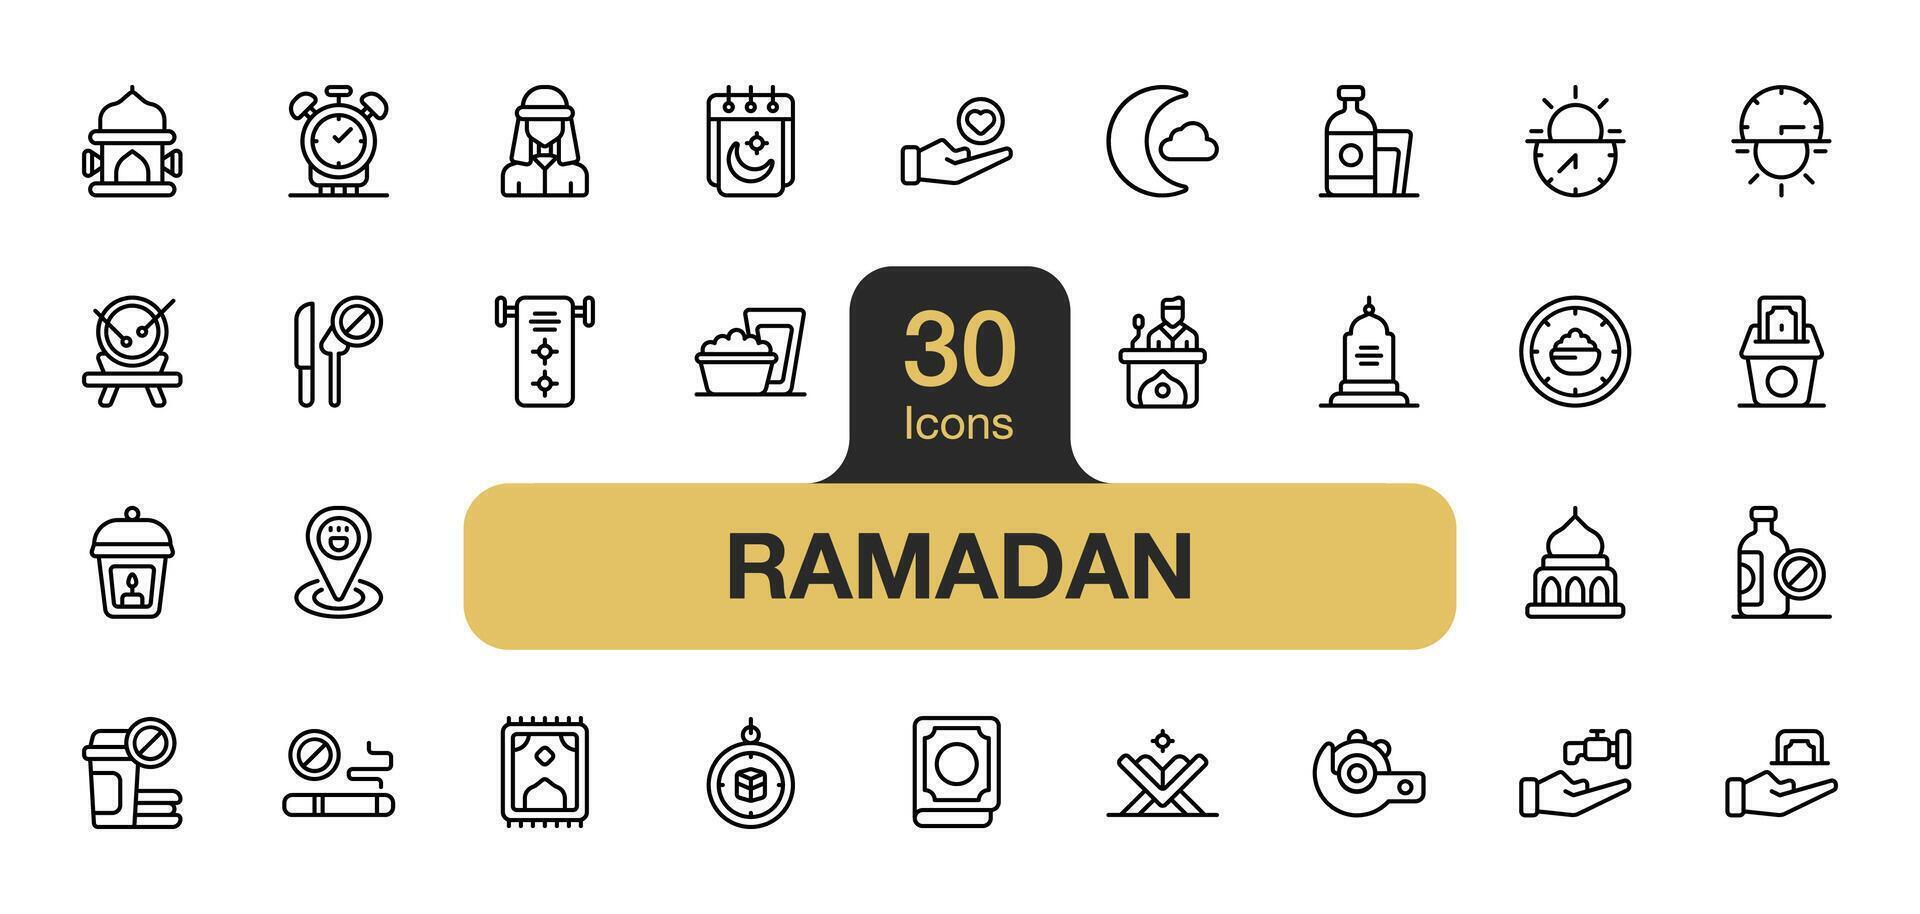 Set of 30 Ramadan icon element sets. Includes crescent moon, charity, meal, no drinks, mosque, and More. Outline icons vector collection.